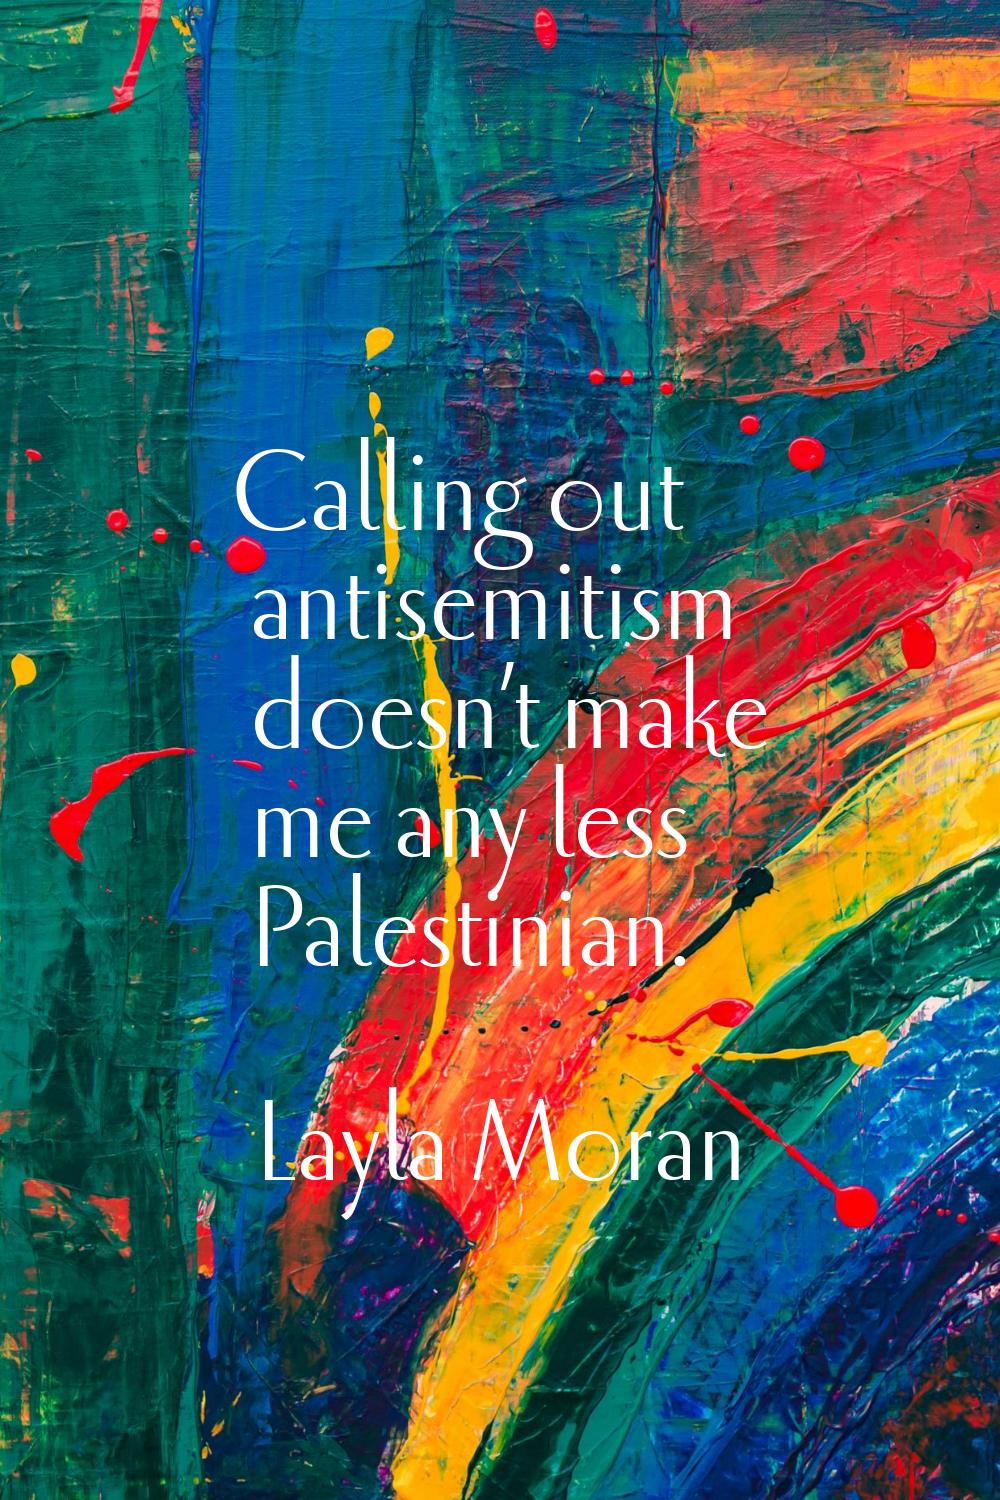 Calling out antisemitism doesn’t make me any less Palestinian.